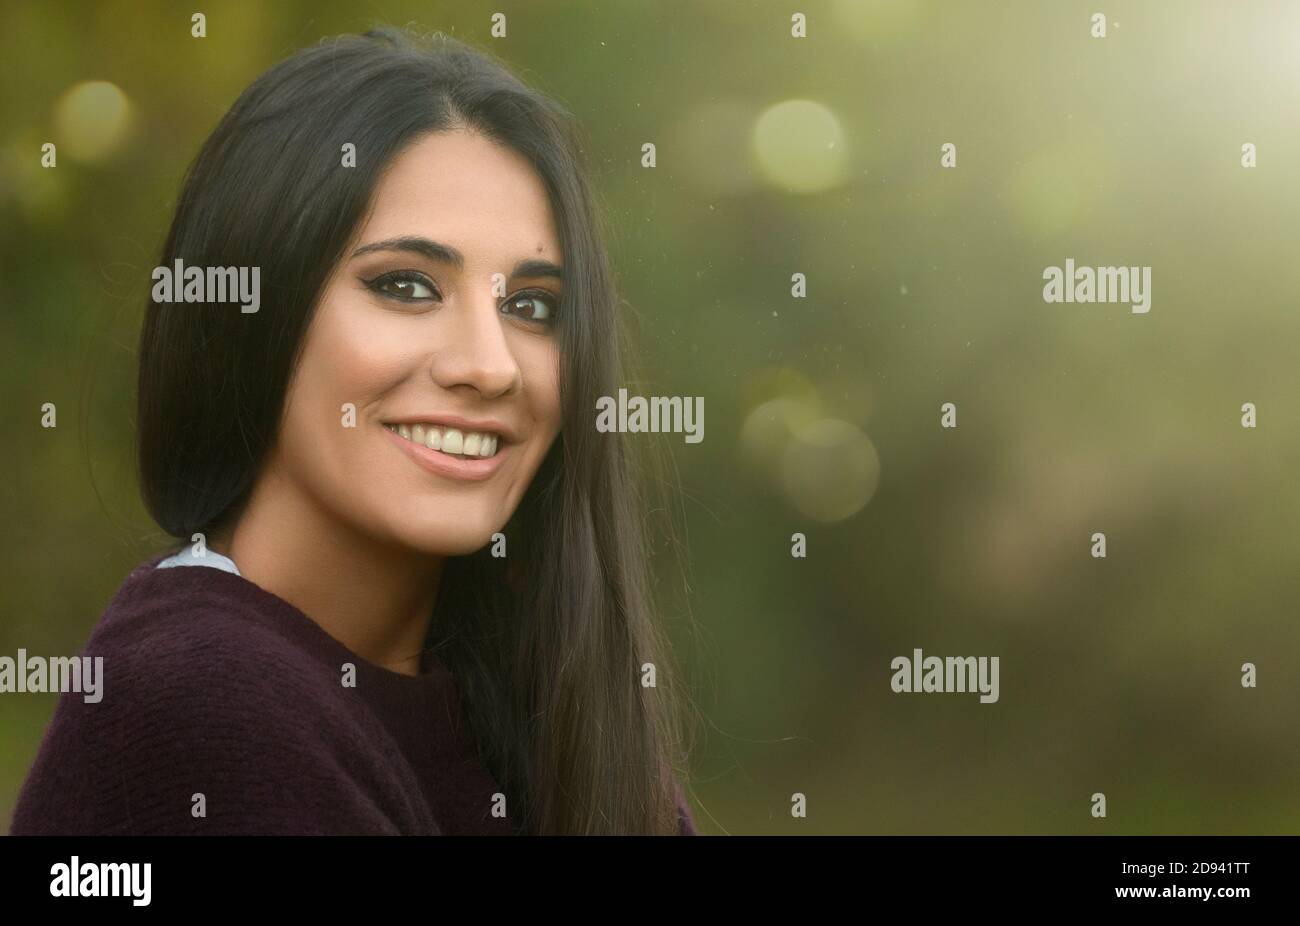 Young happy woman smiling at camera in a green nature background Stock Photo